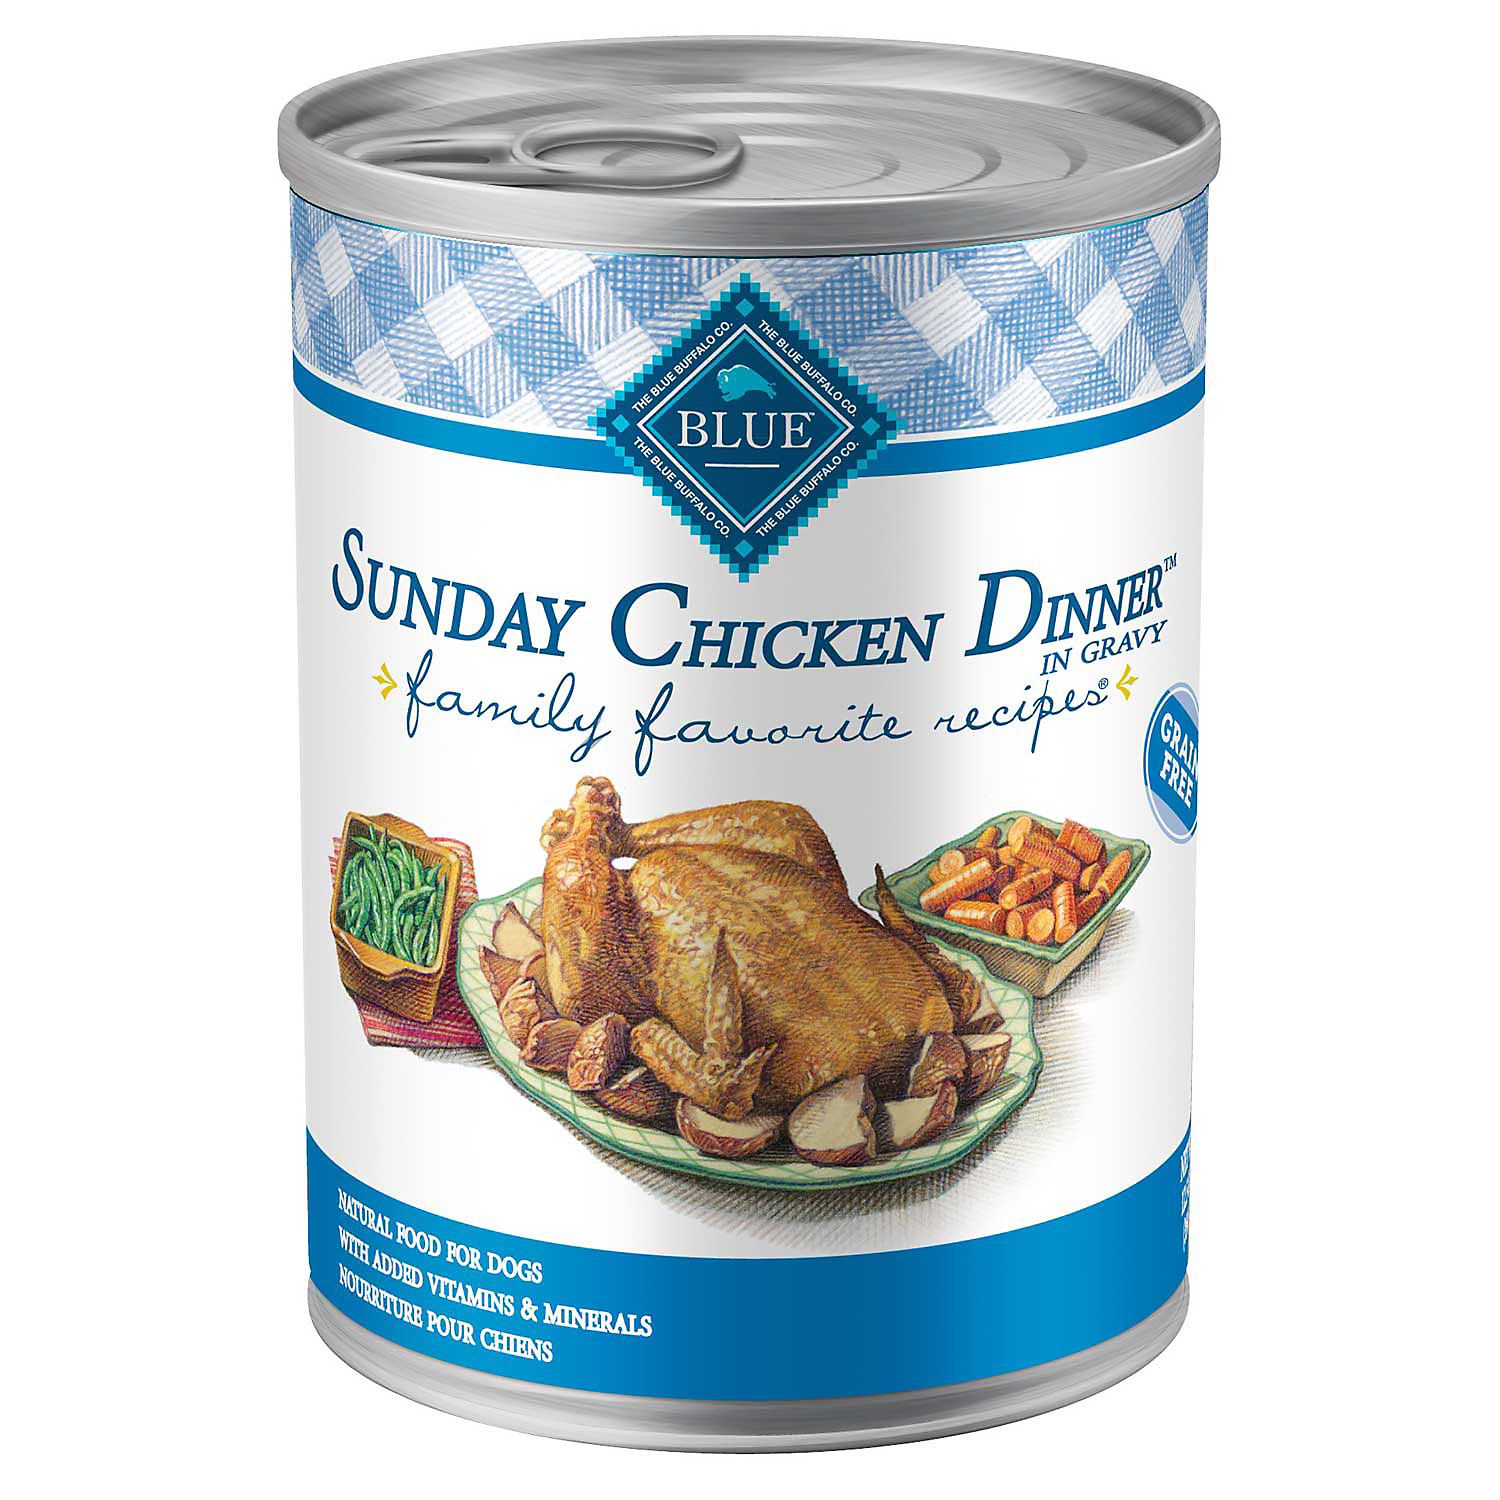 Blue Buffalo Sunday Chicken Dinner Adult Canned Dog Food, 